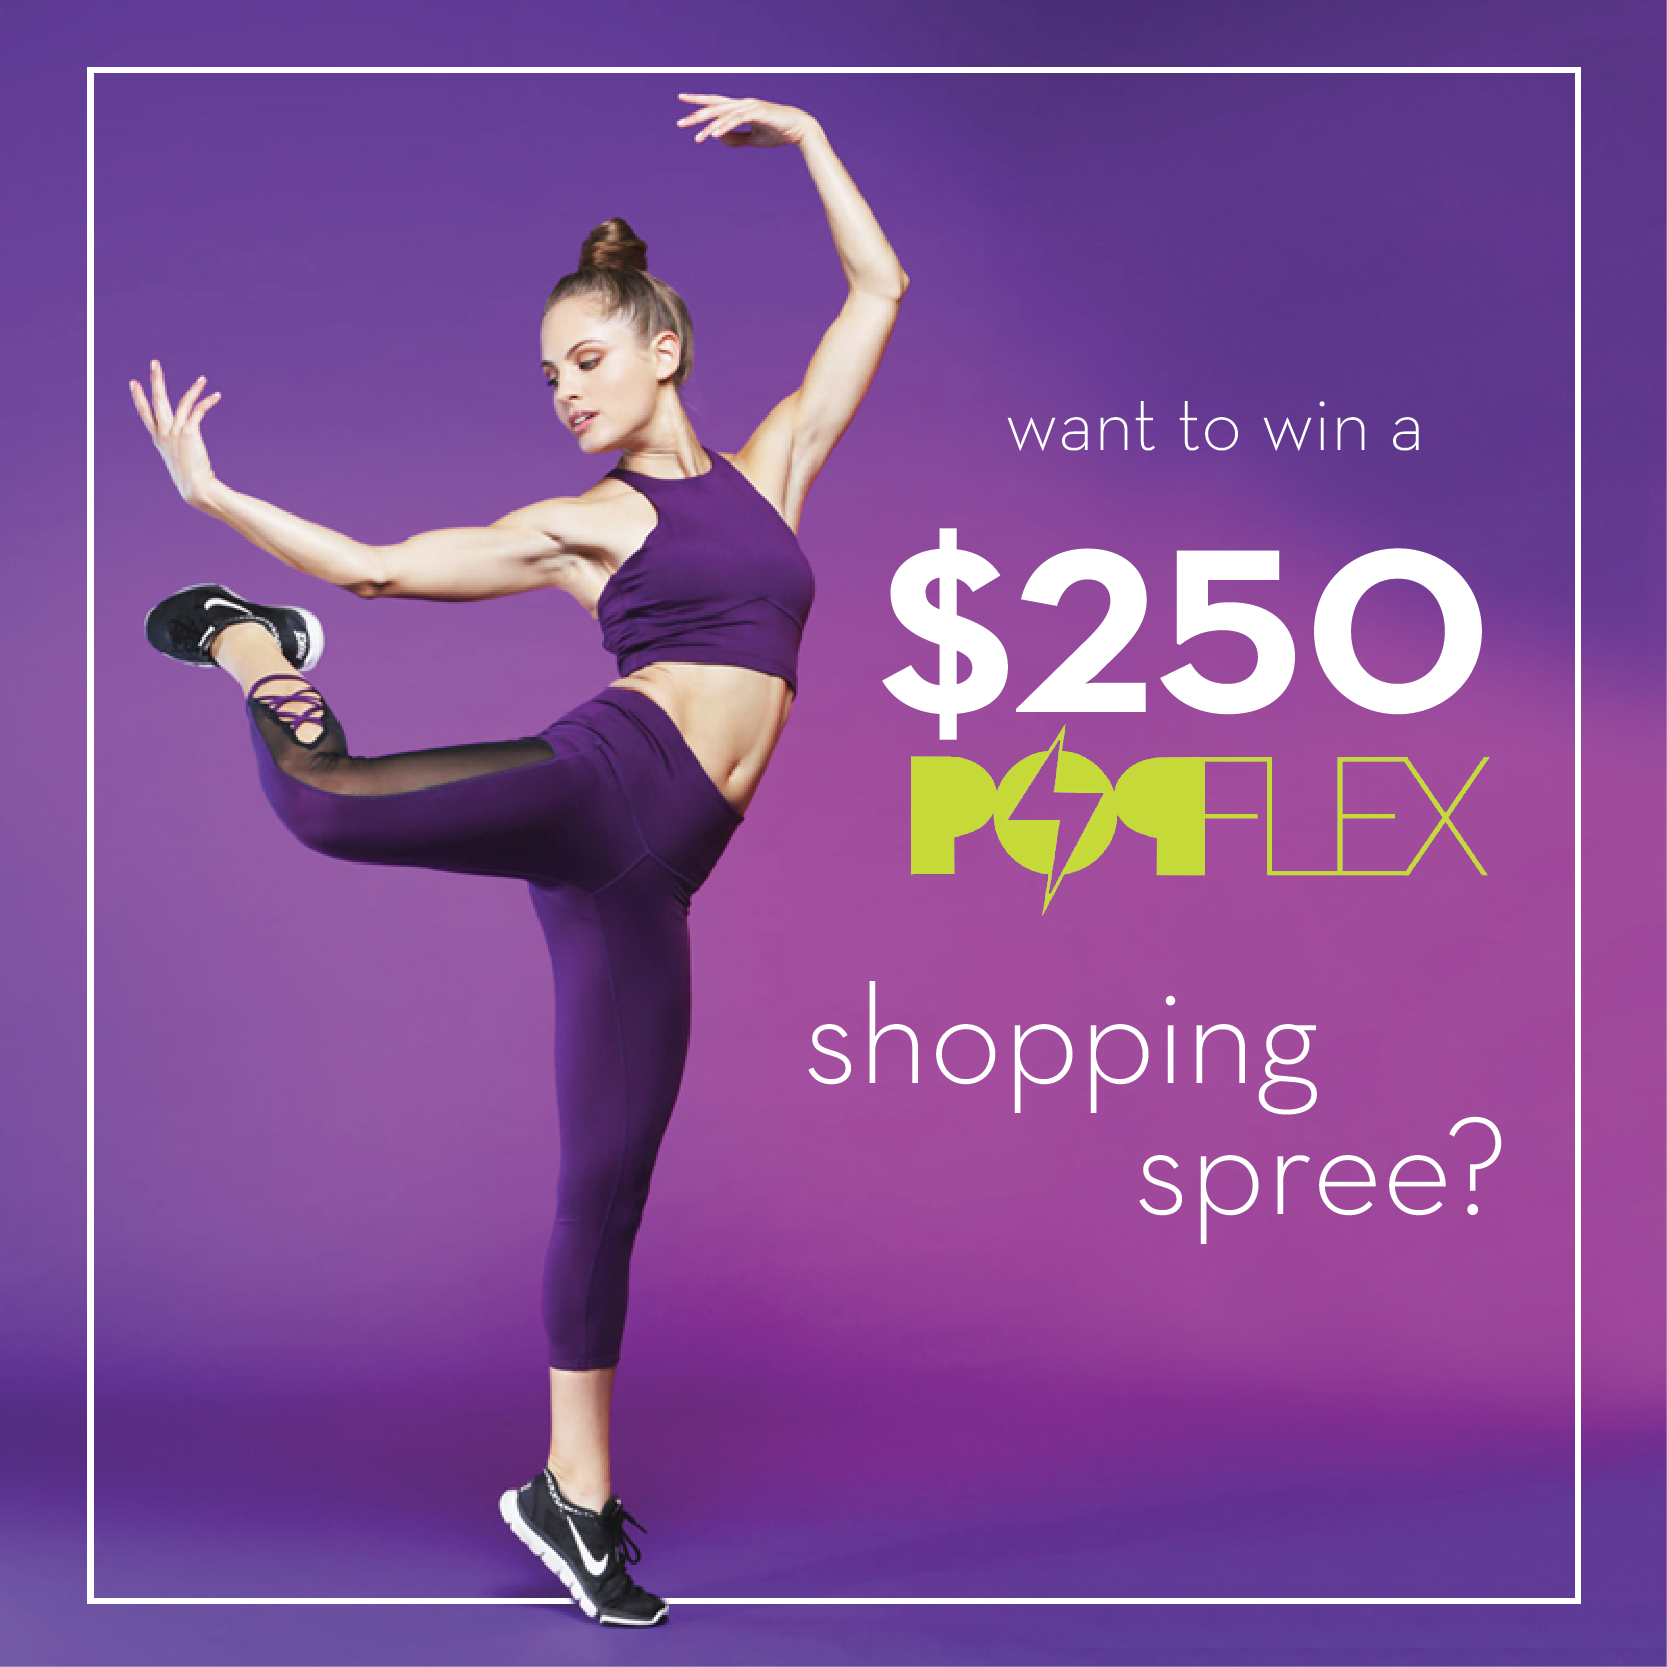 Blogilates Has An Activewear Line Called POPLEX, So I Decided To Try It And  See If It's Worth The Hype